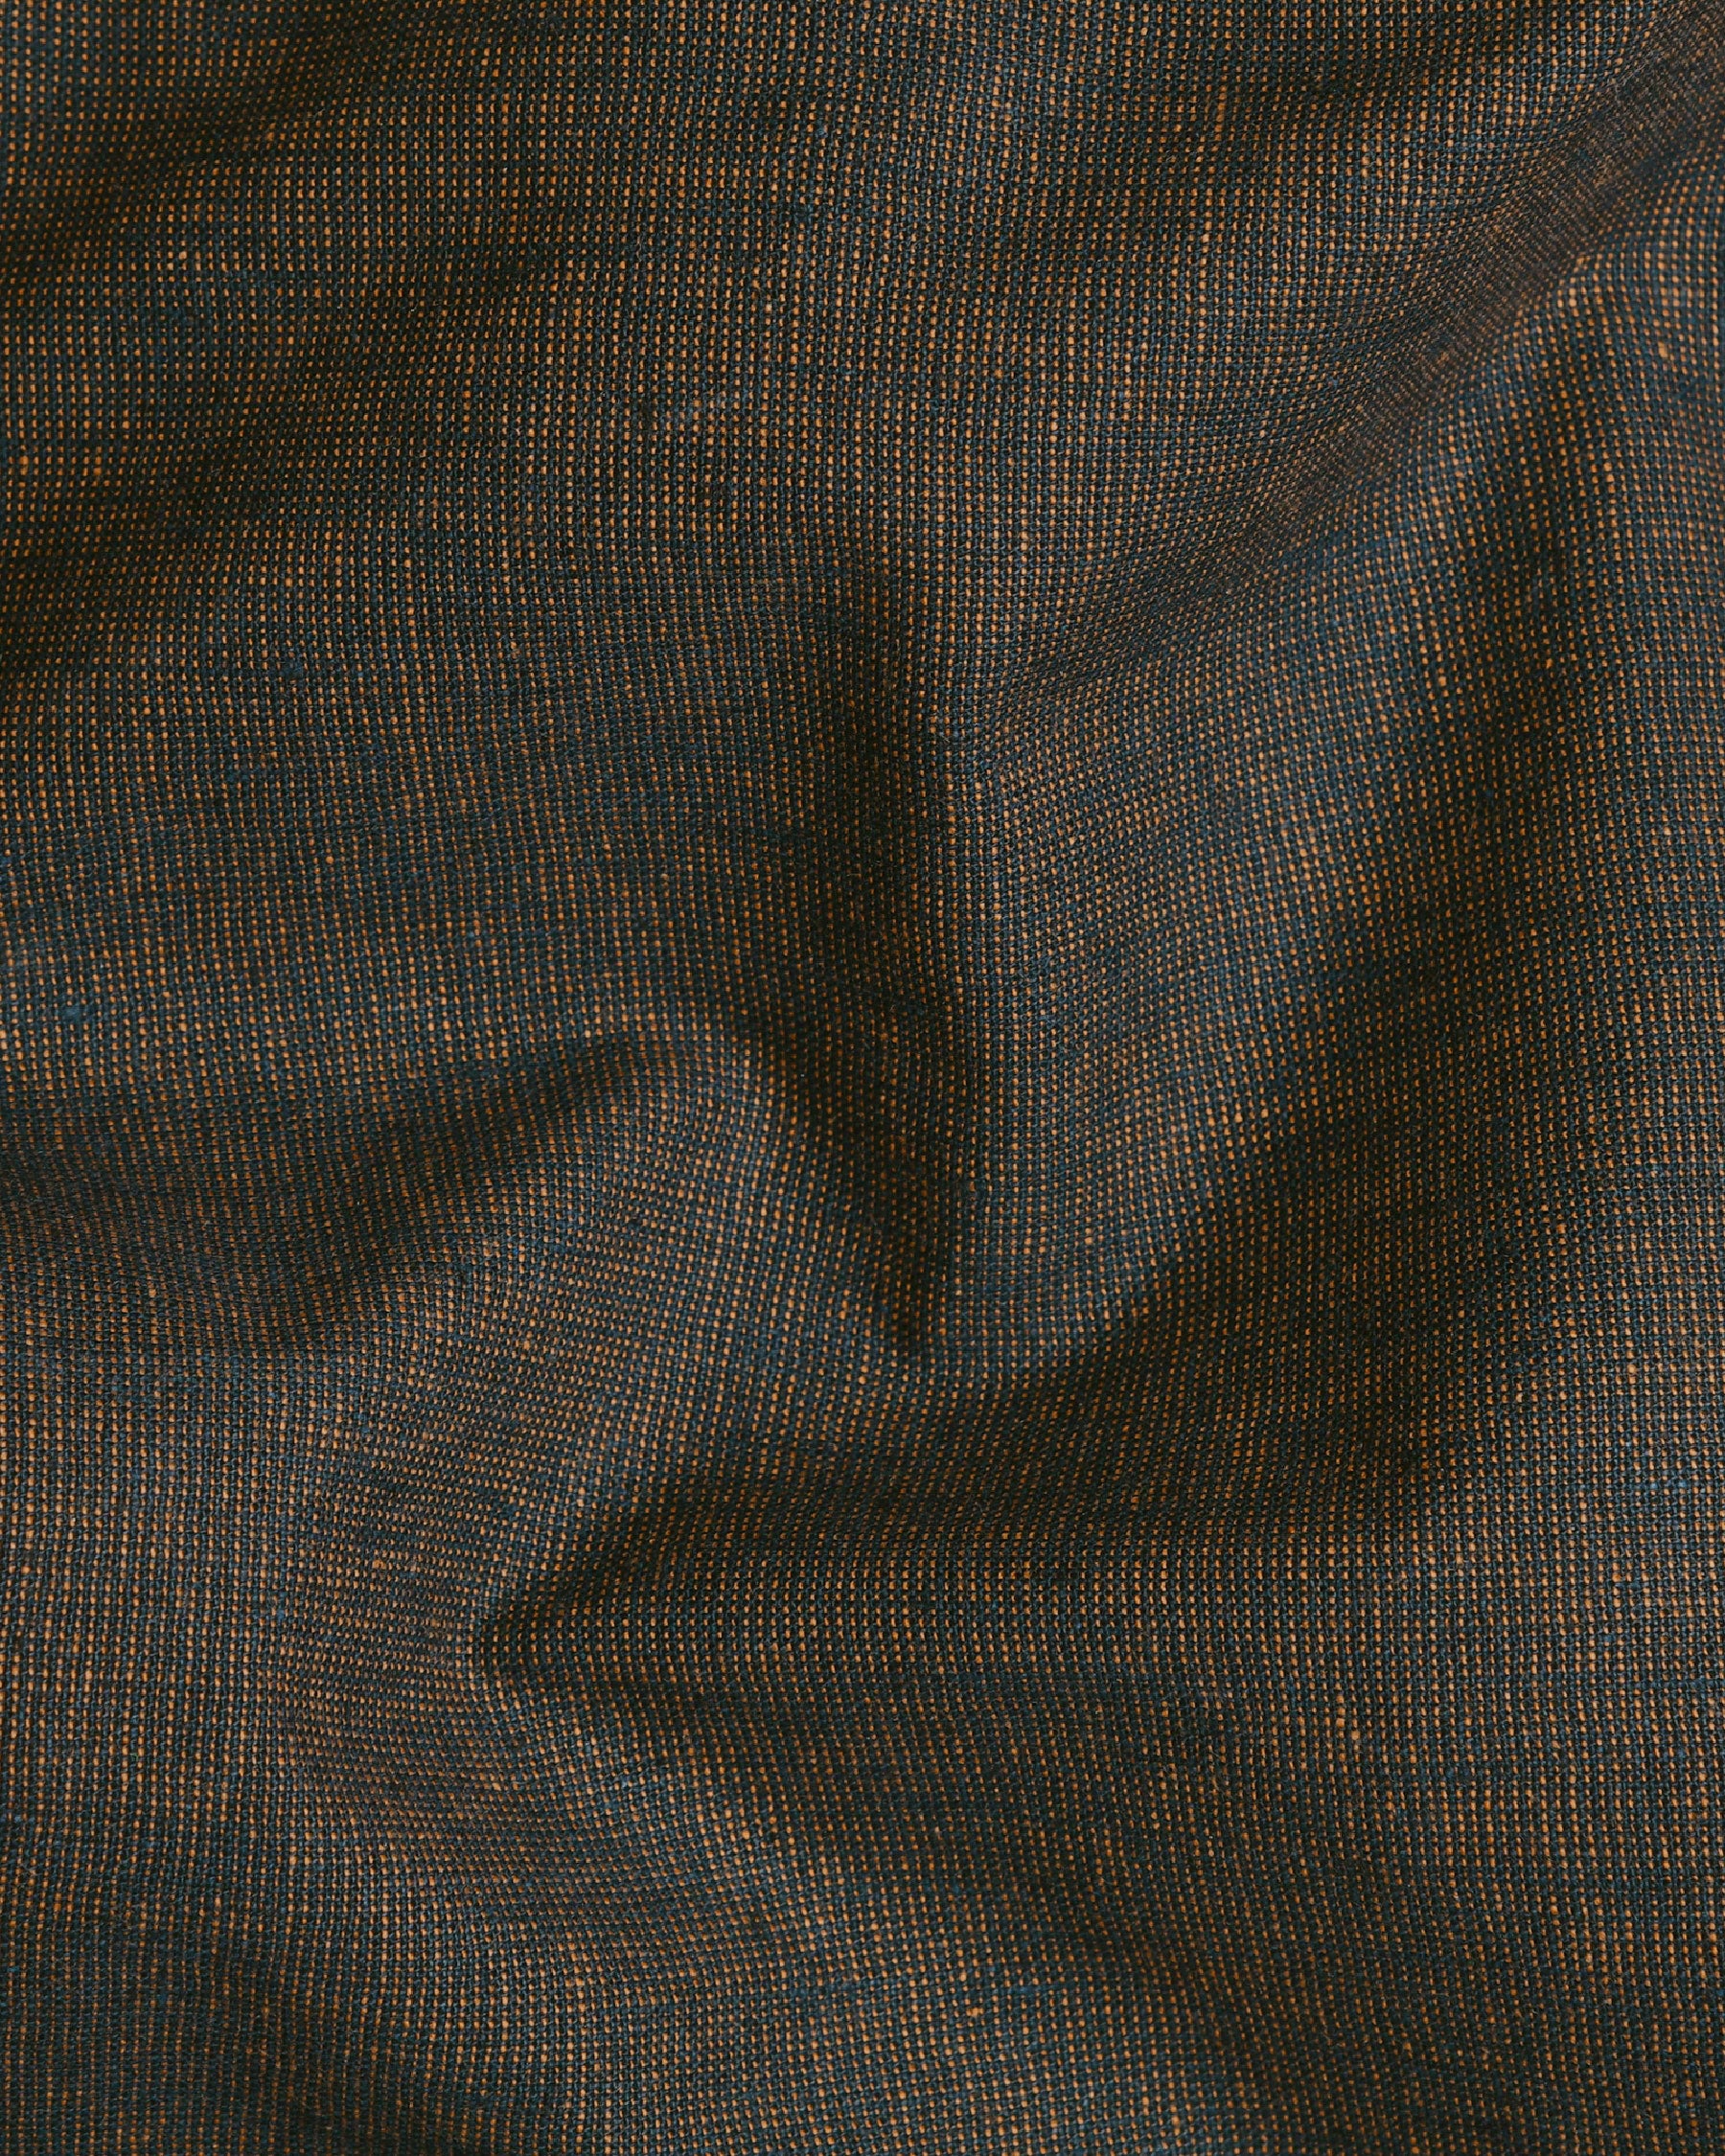 Chocolate Brown Linen Performance Pant